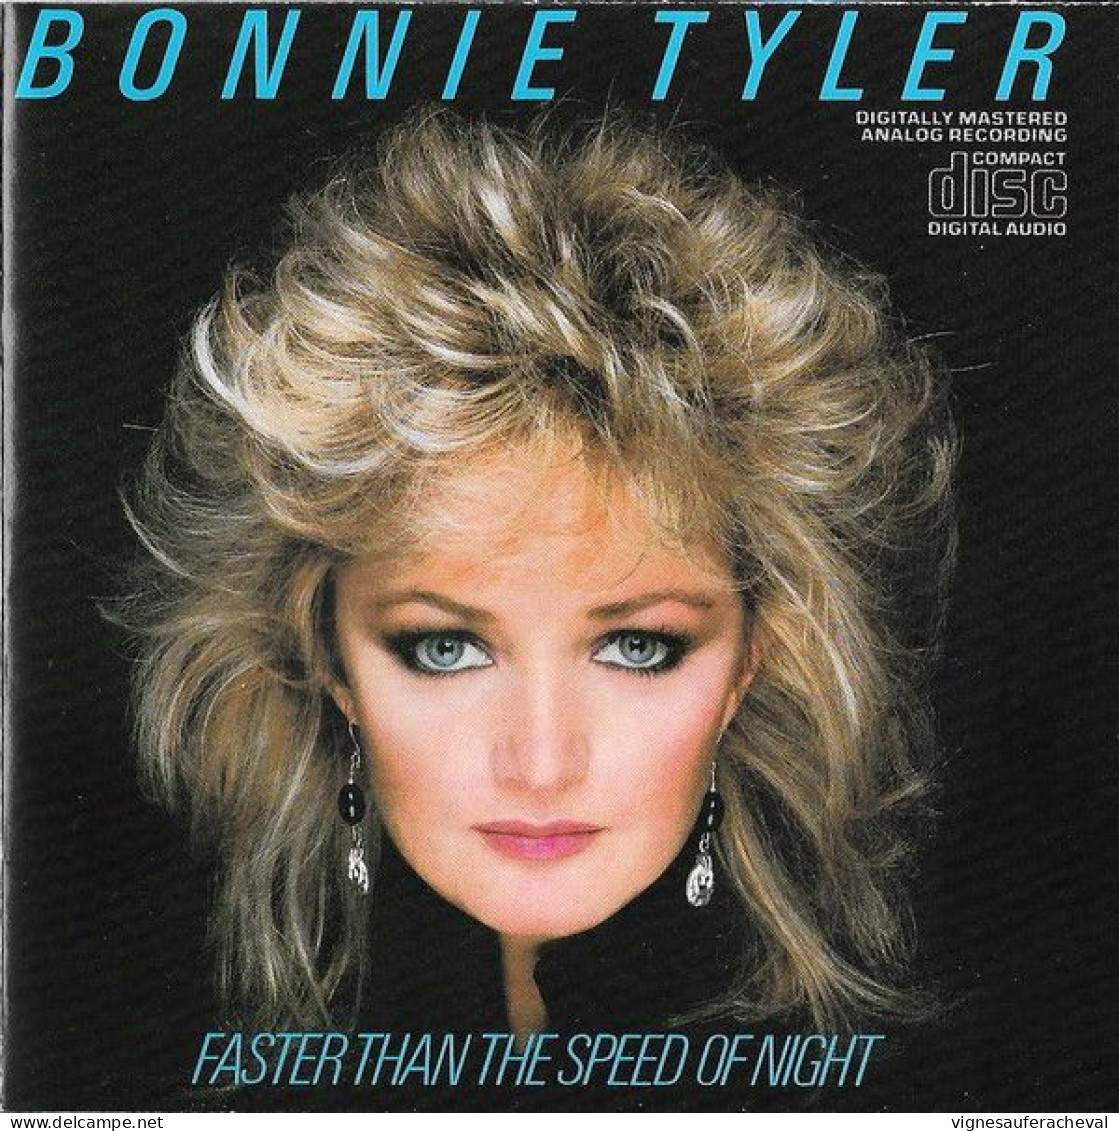 Bonnie Tyler - Faster Than The Speed Of Night - Other - English Music